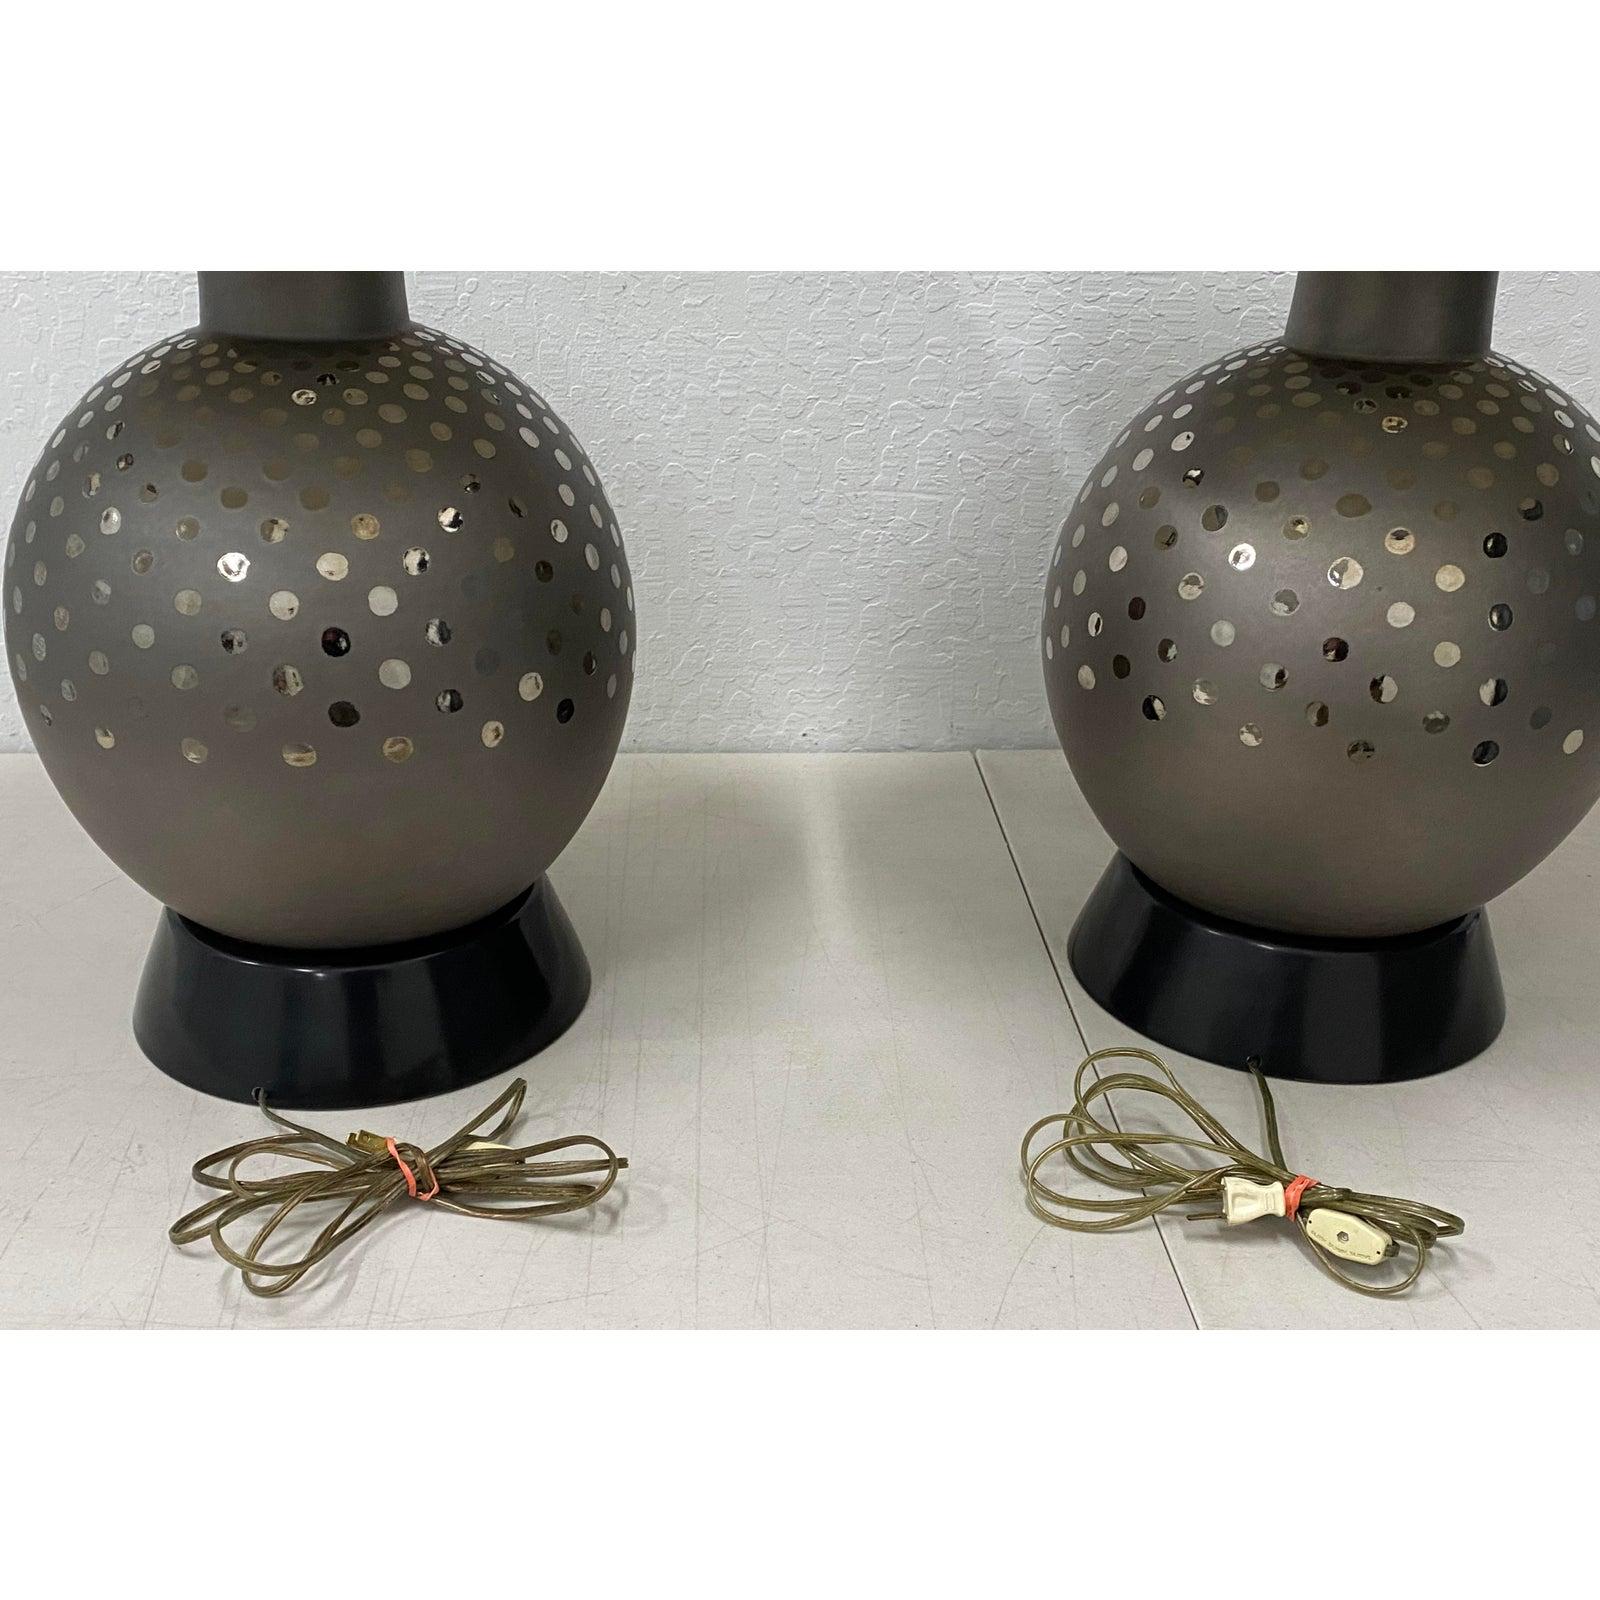 Pair of Vintage Ceramic Metallic Silver Glaze Ball Lamps by Marbro, circa 1970 For Sale 1